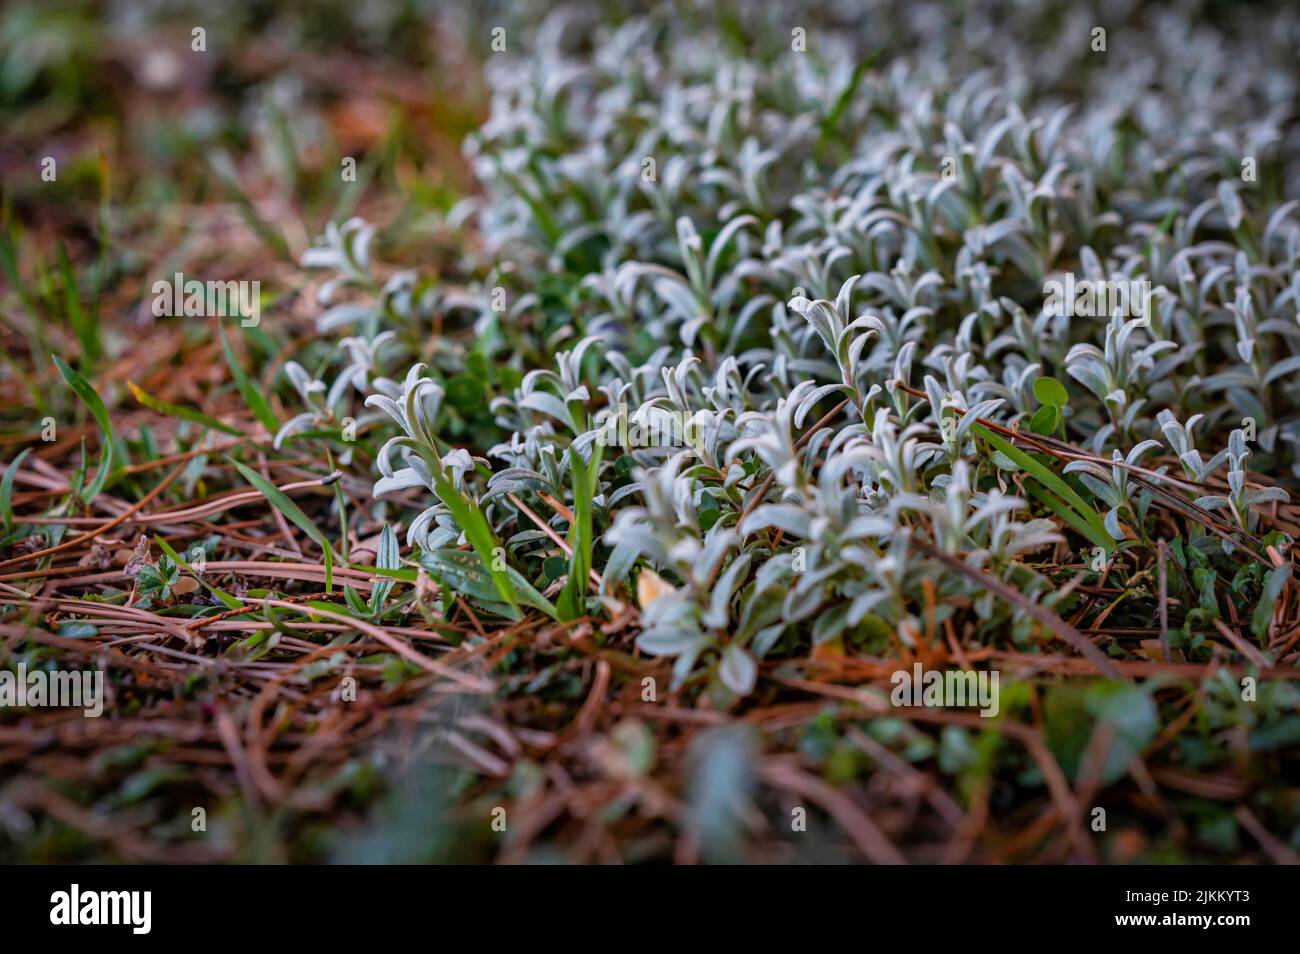 A close-up of growing on the ground, herbaceous plants under sunlight Stock Photo